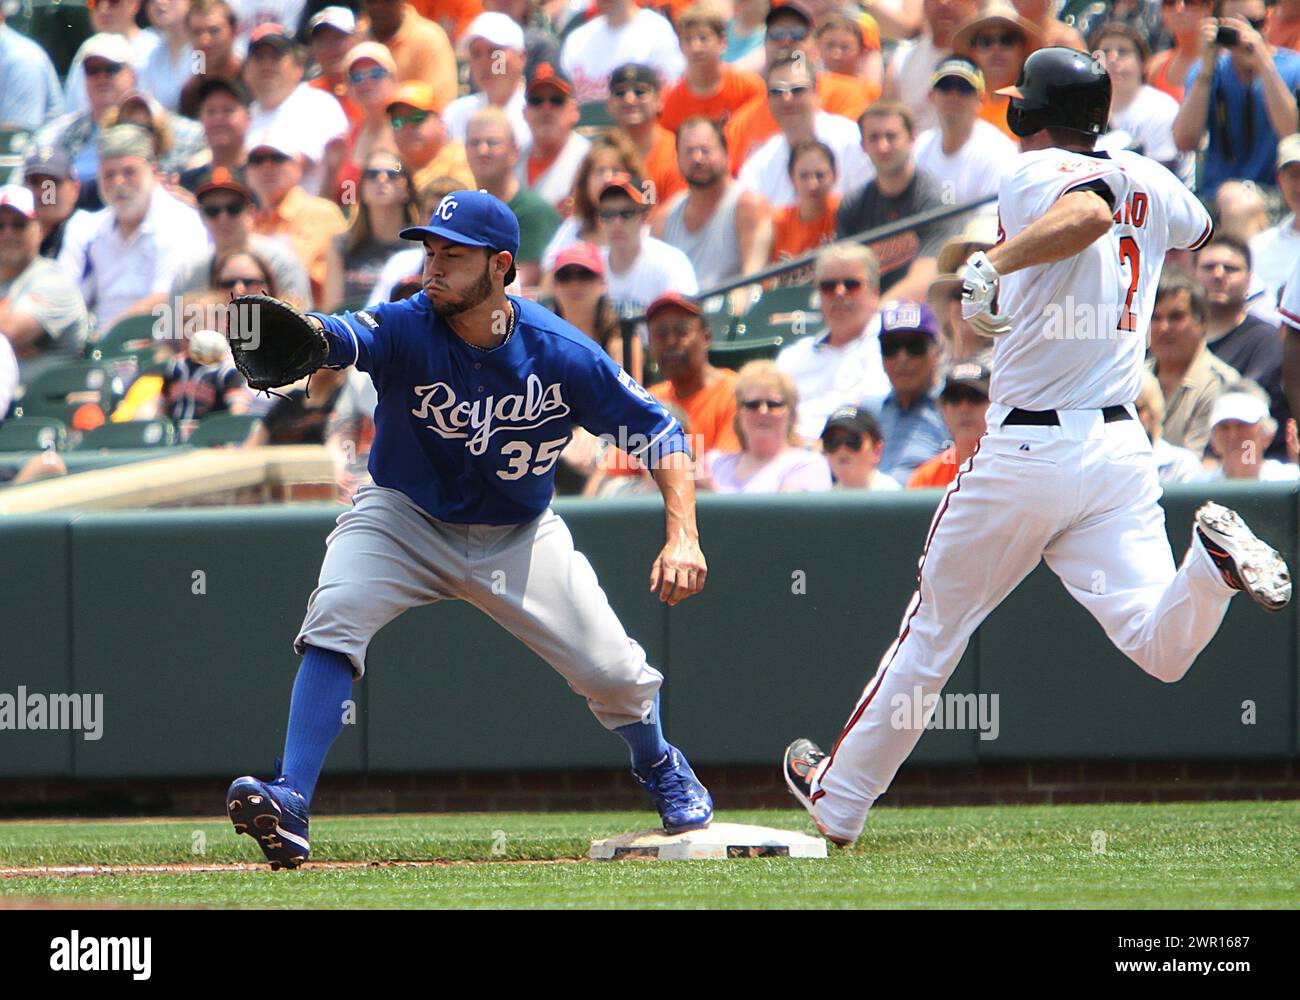 MAY 26 2011: J.J. Hardy (2) of the Baltimore Orioles is caught out at first base by Eric Hosmer (35) of  the Kansas City Royals during an American League baseball game at Camden Yards in Baltimore, Maryland. Stock Photo